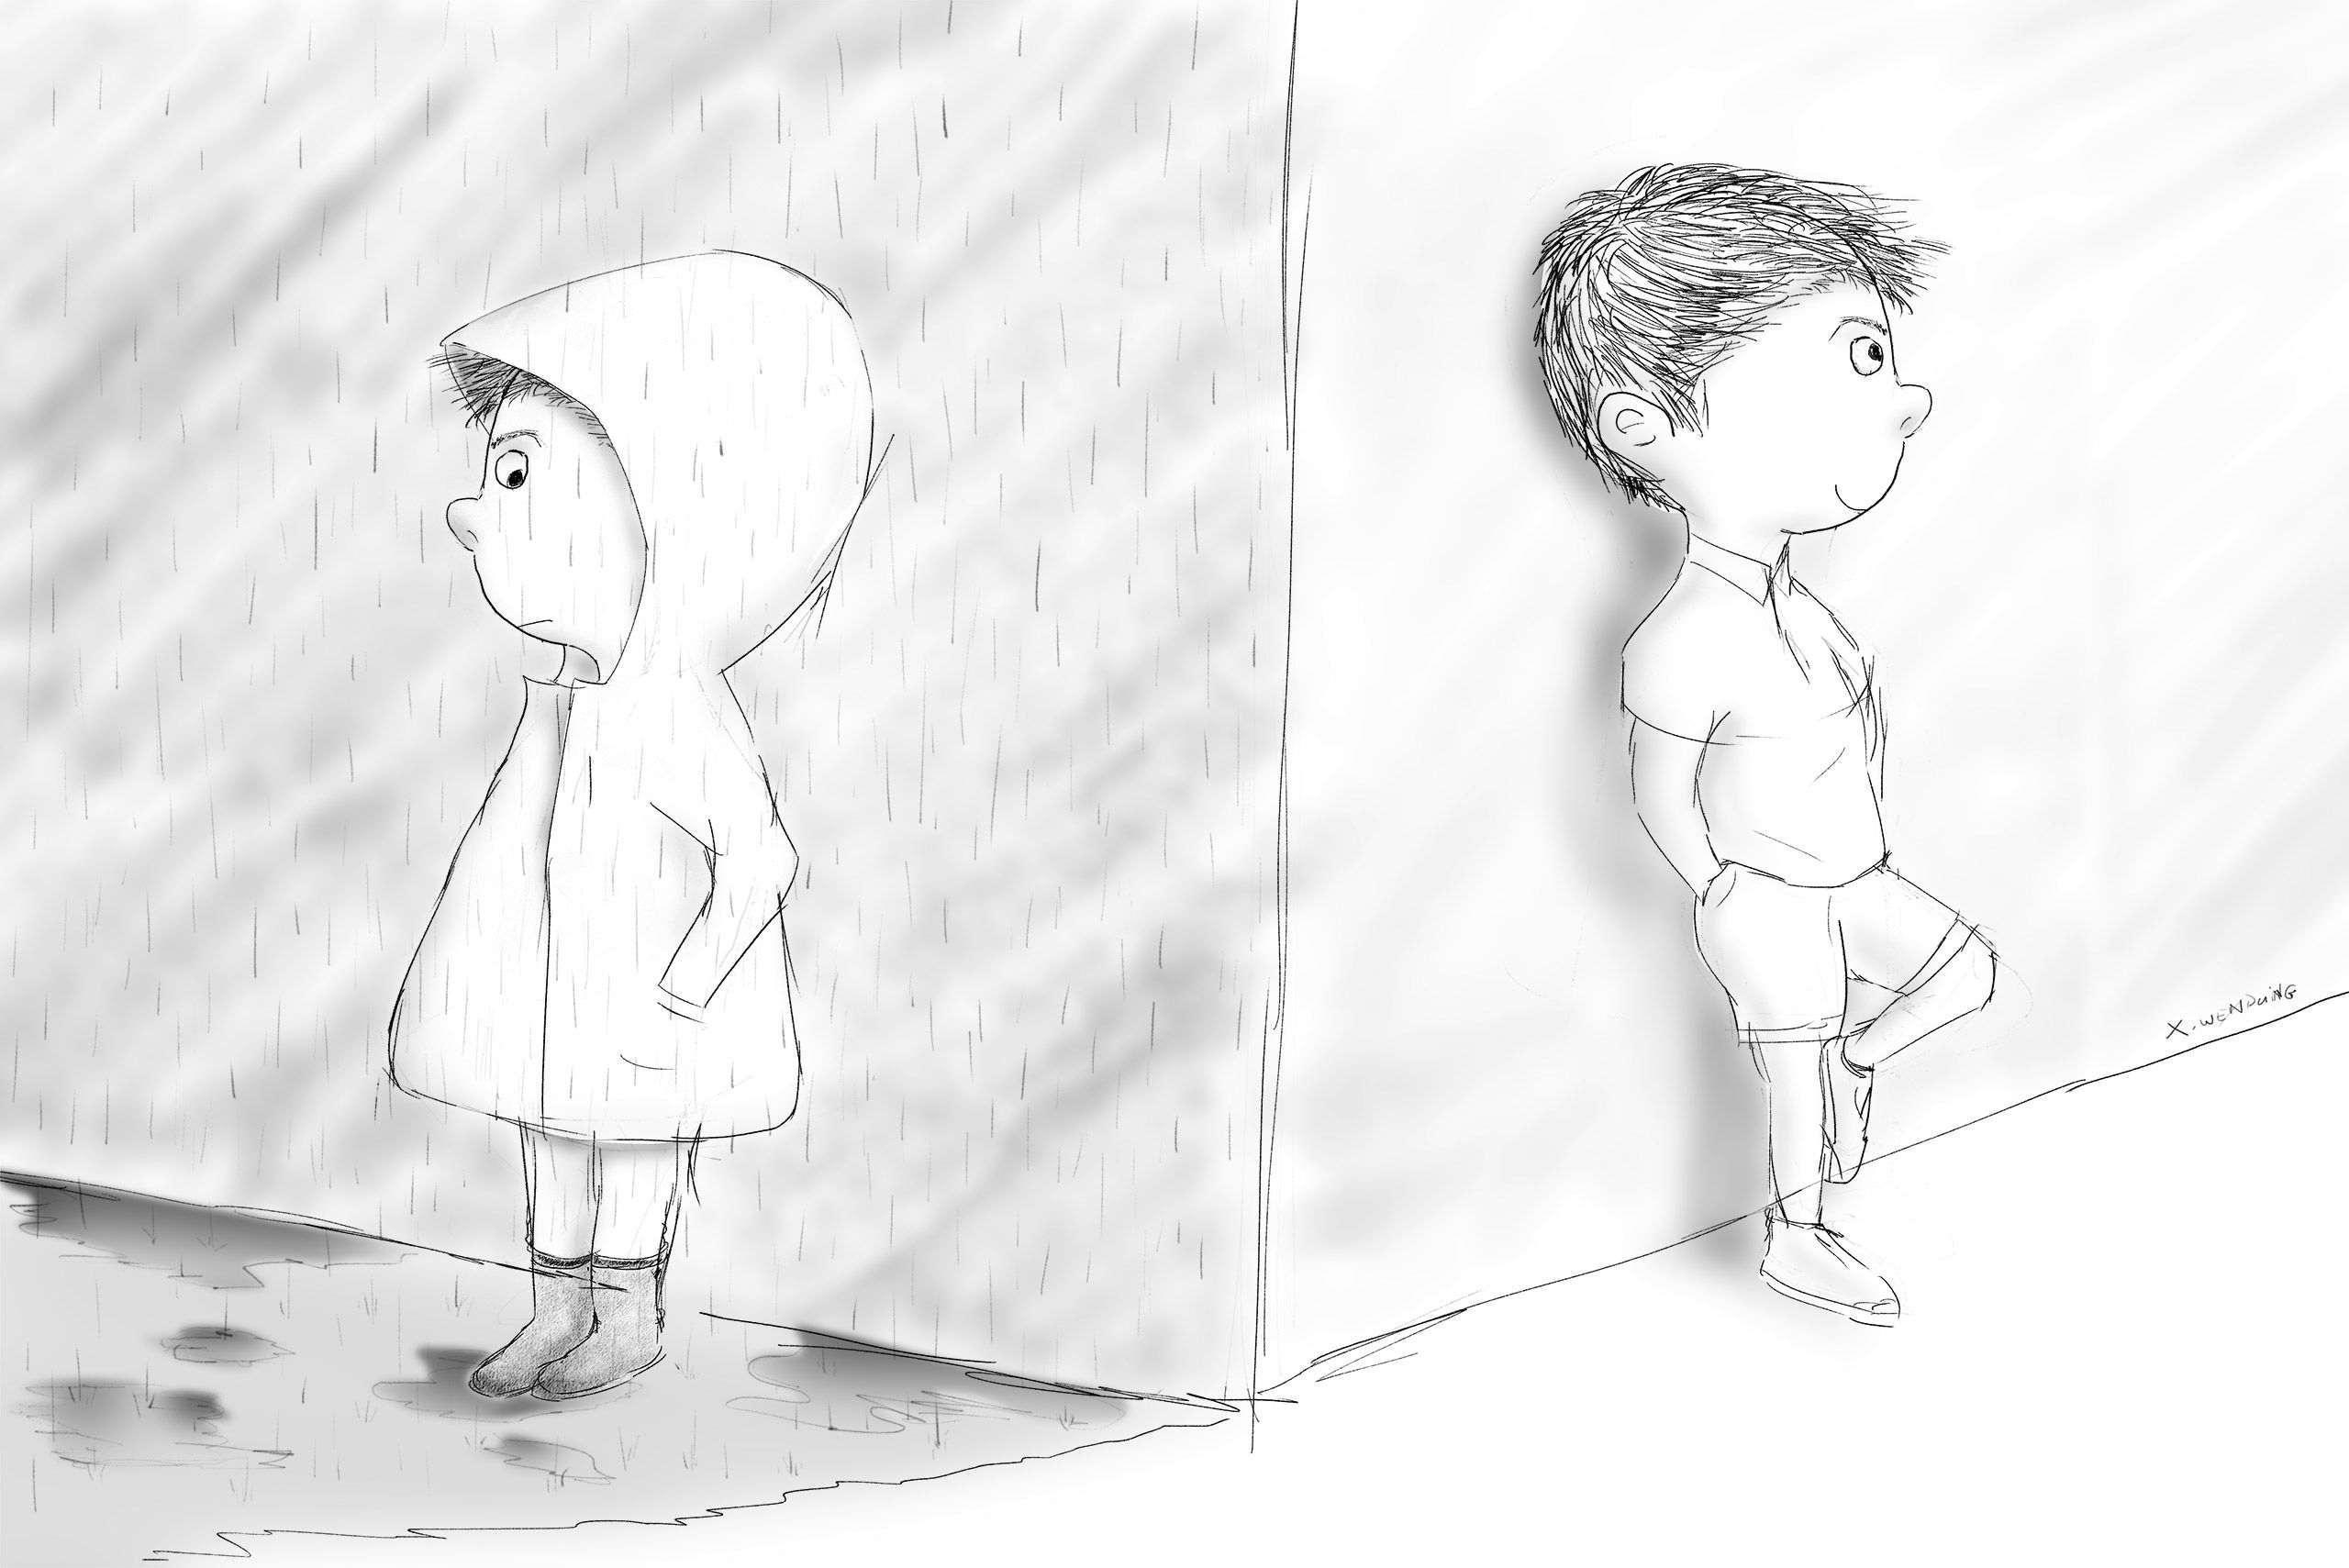 Rainy day, sunny day, boy character sketch illustration by Xavier Wendling